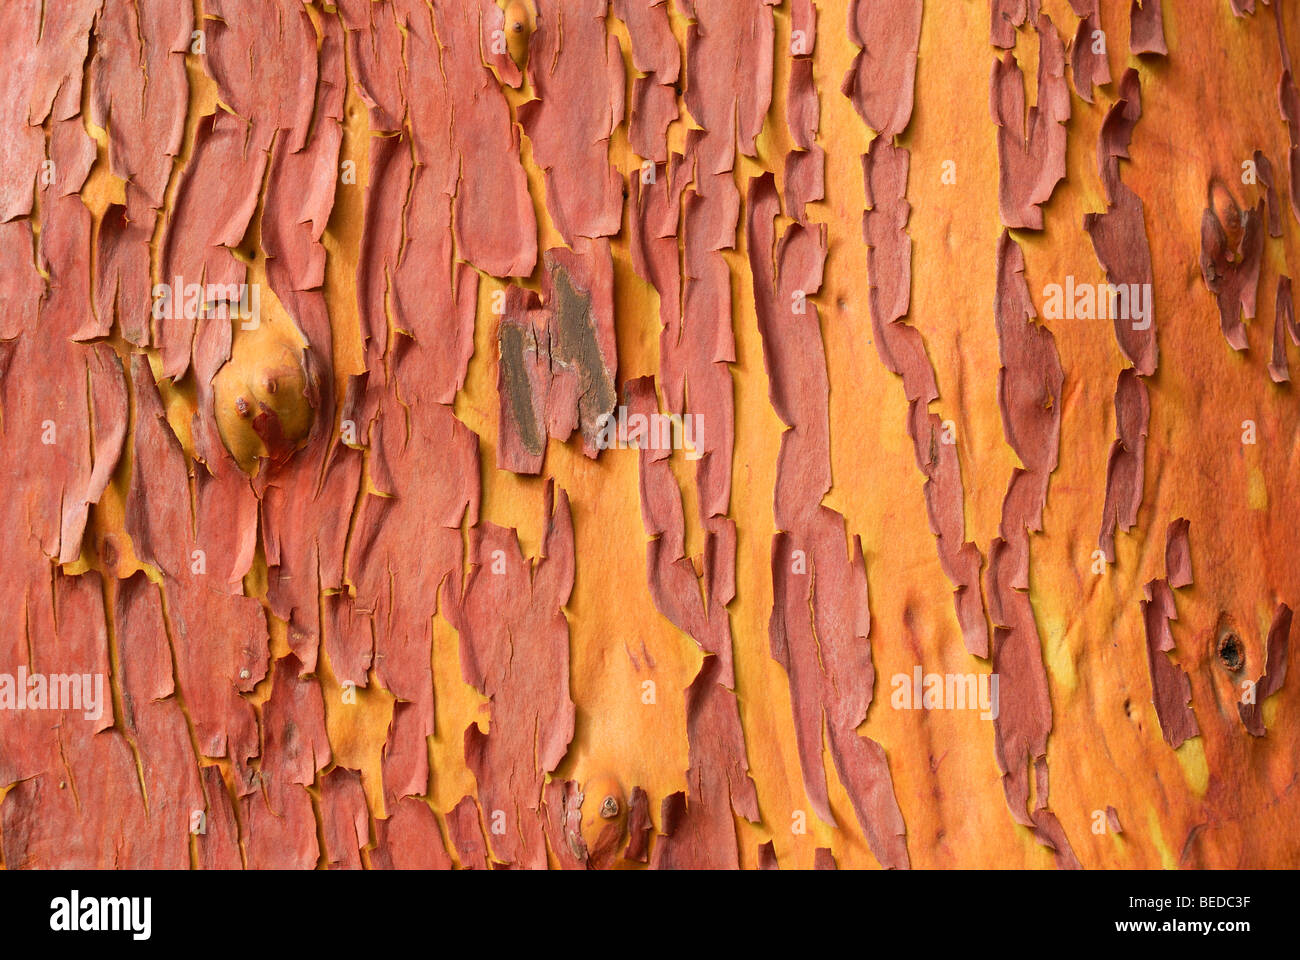 Pacific Madrone or Strawberry Tree (Arbutus menziesii), bark detail, Victoria, Vancouver Island, Canada, North America Stock Photo